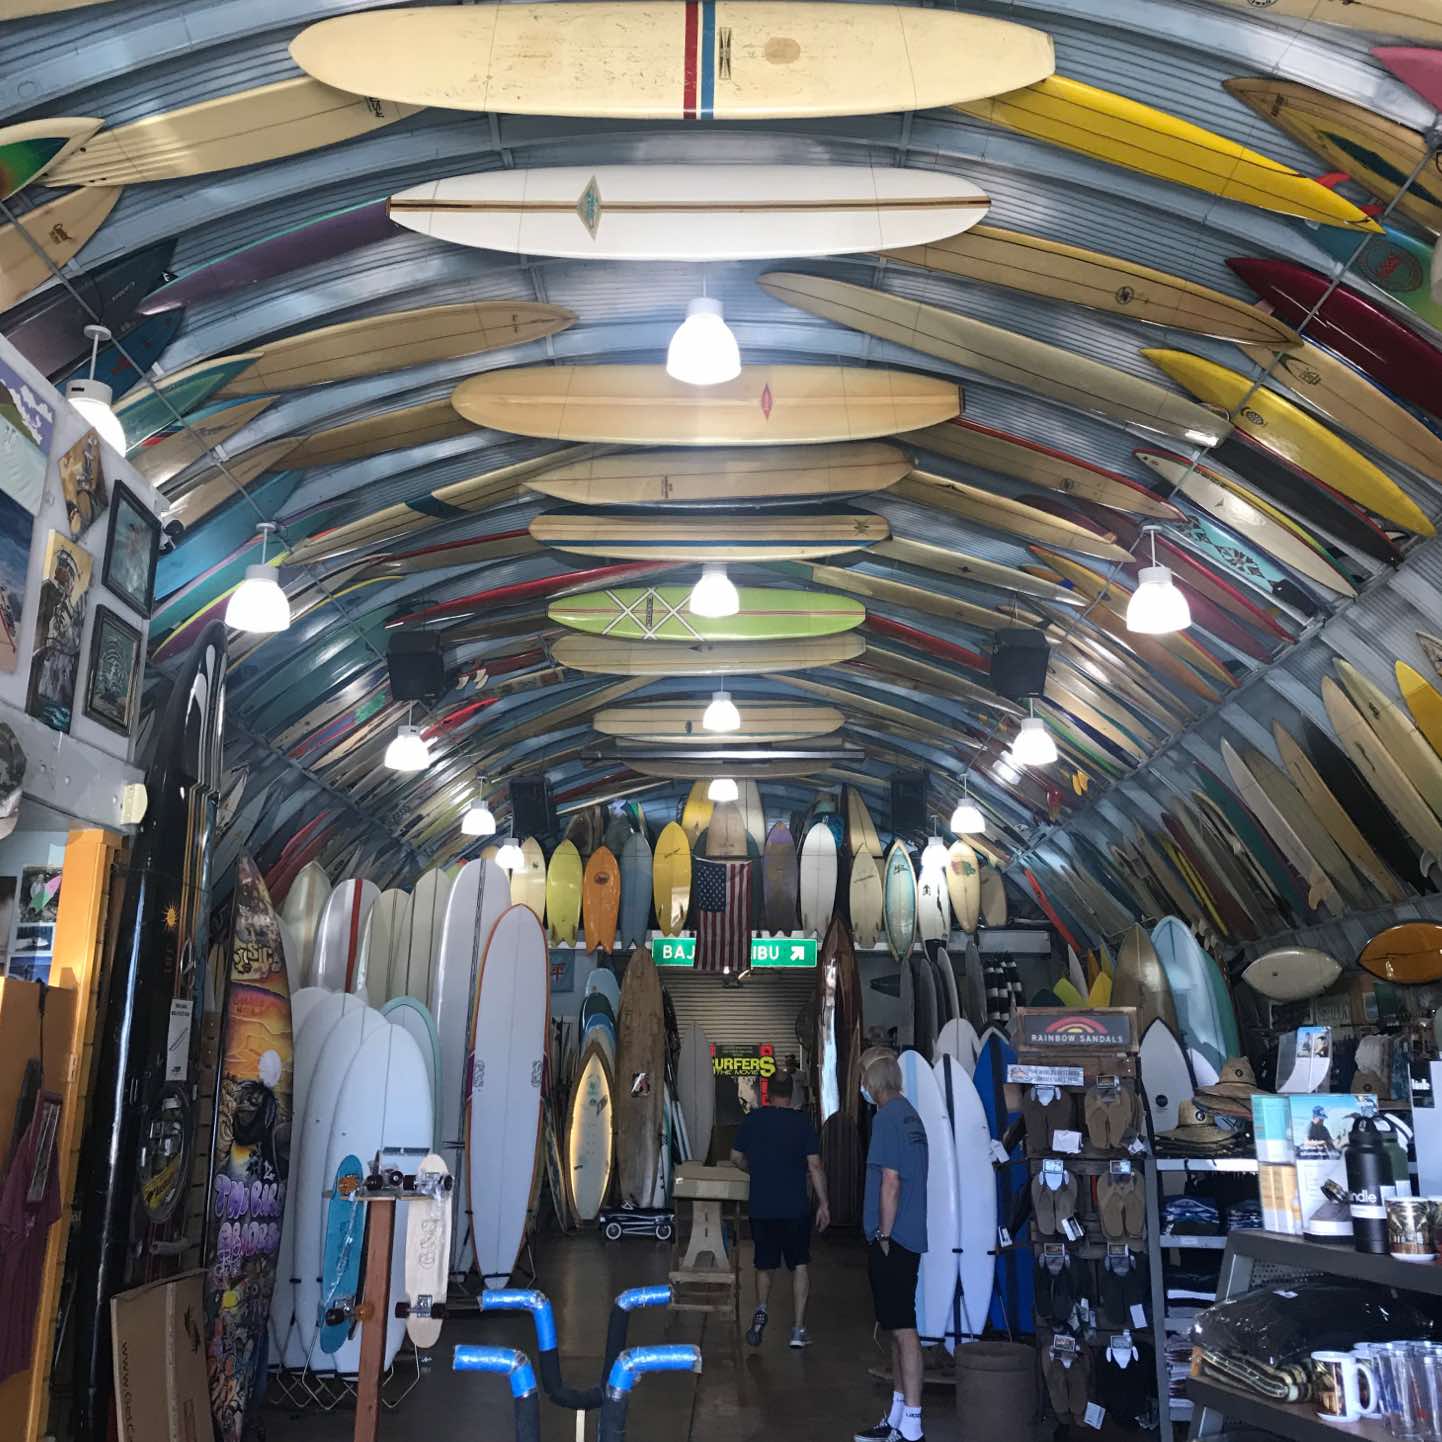 A surf shop with many surfboards hanging from the ceiling